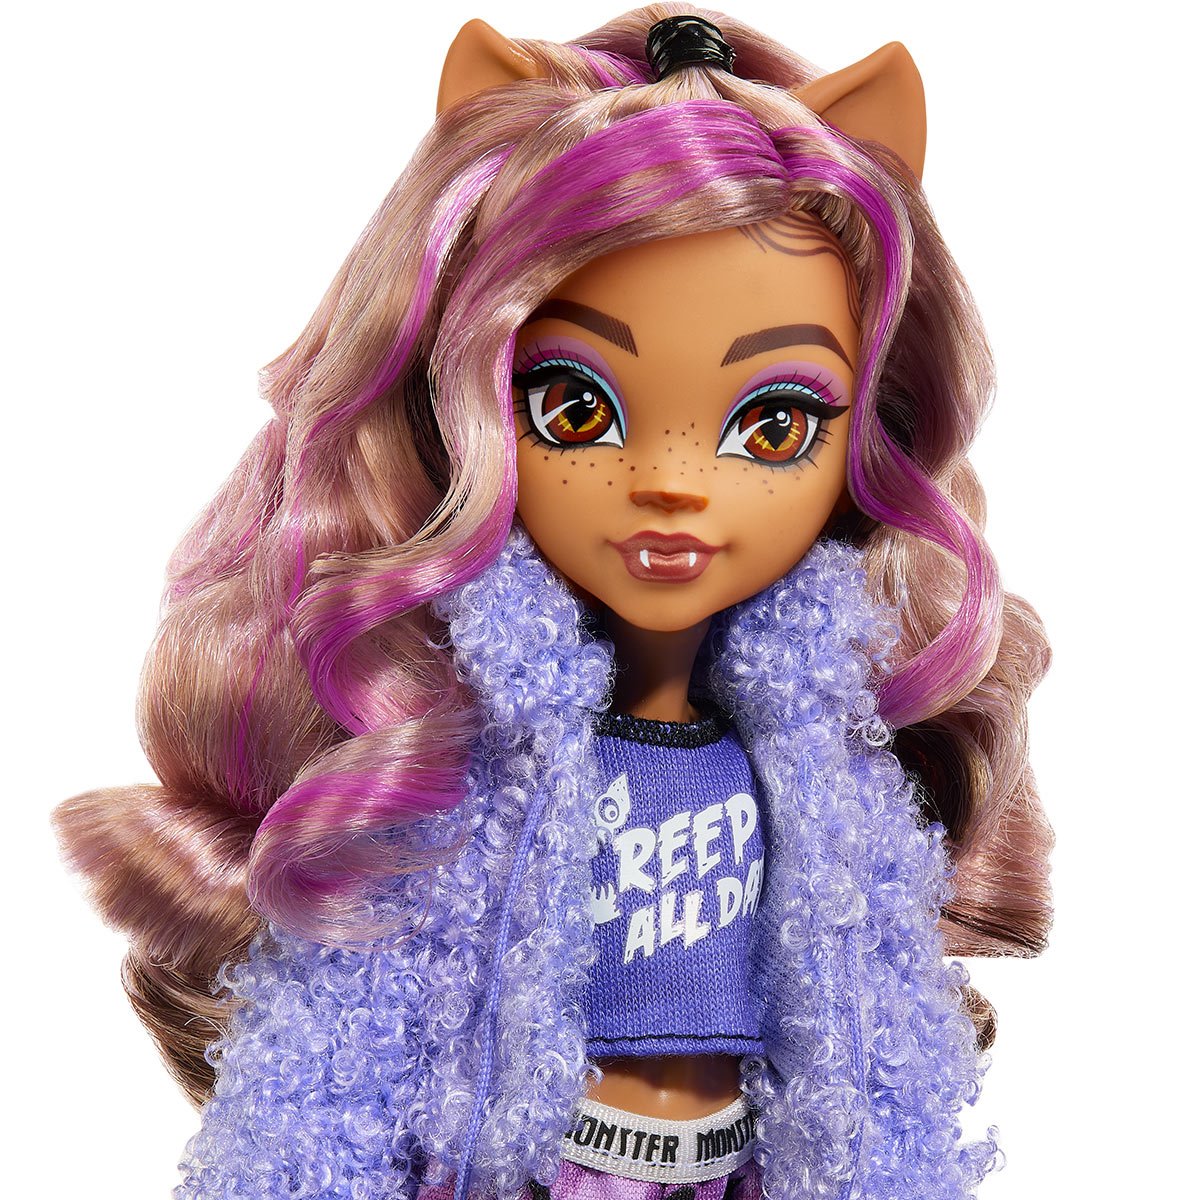 MONSTER HIGH DOLL CLAWDEEN WITH KILLER STYLE DAUGHTER OF WEREWOLF